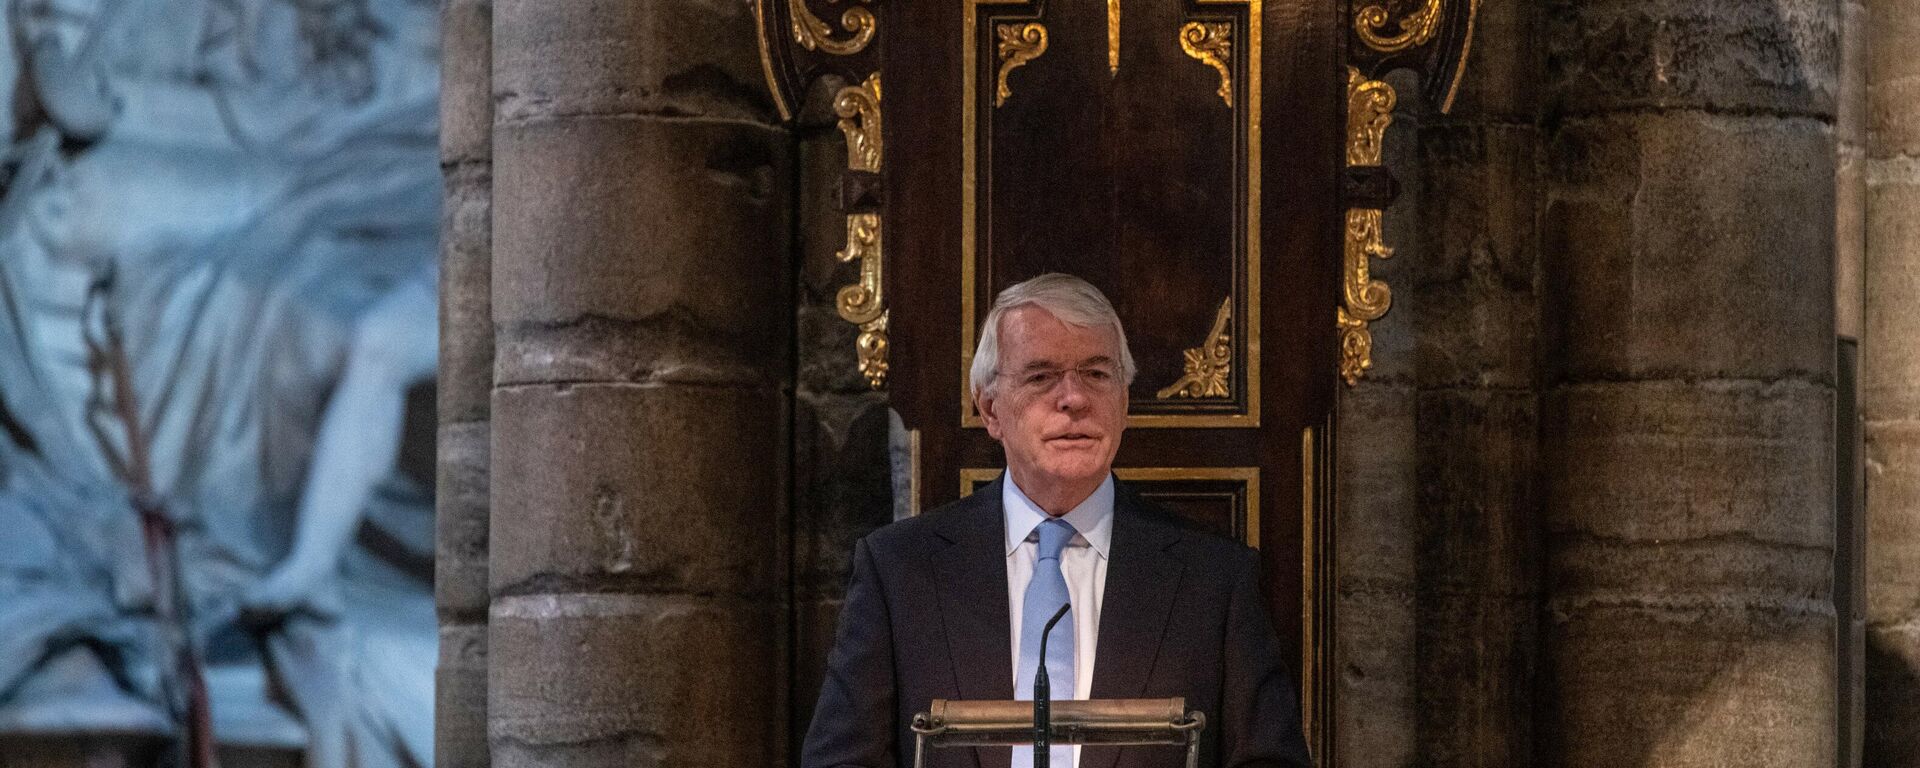 Former Prime Minister John Major addresses a Service of Thanksgiving for the life and work of Paddy Ashdown, former leader of the Liberal Democrats at Westminster Abbey in central London on September 10, 2019. - Sputnik International, 1920, 06.11.2021